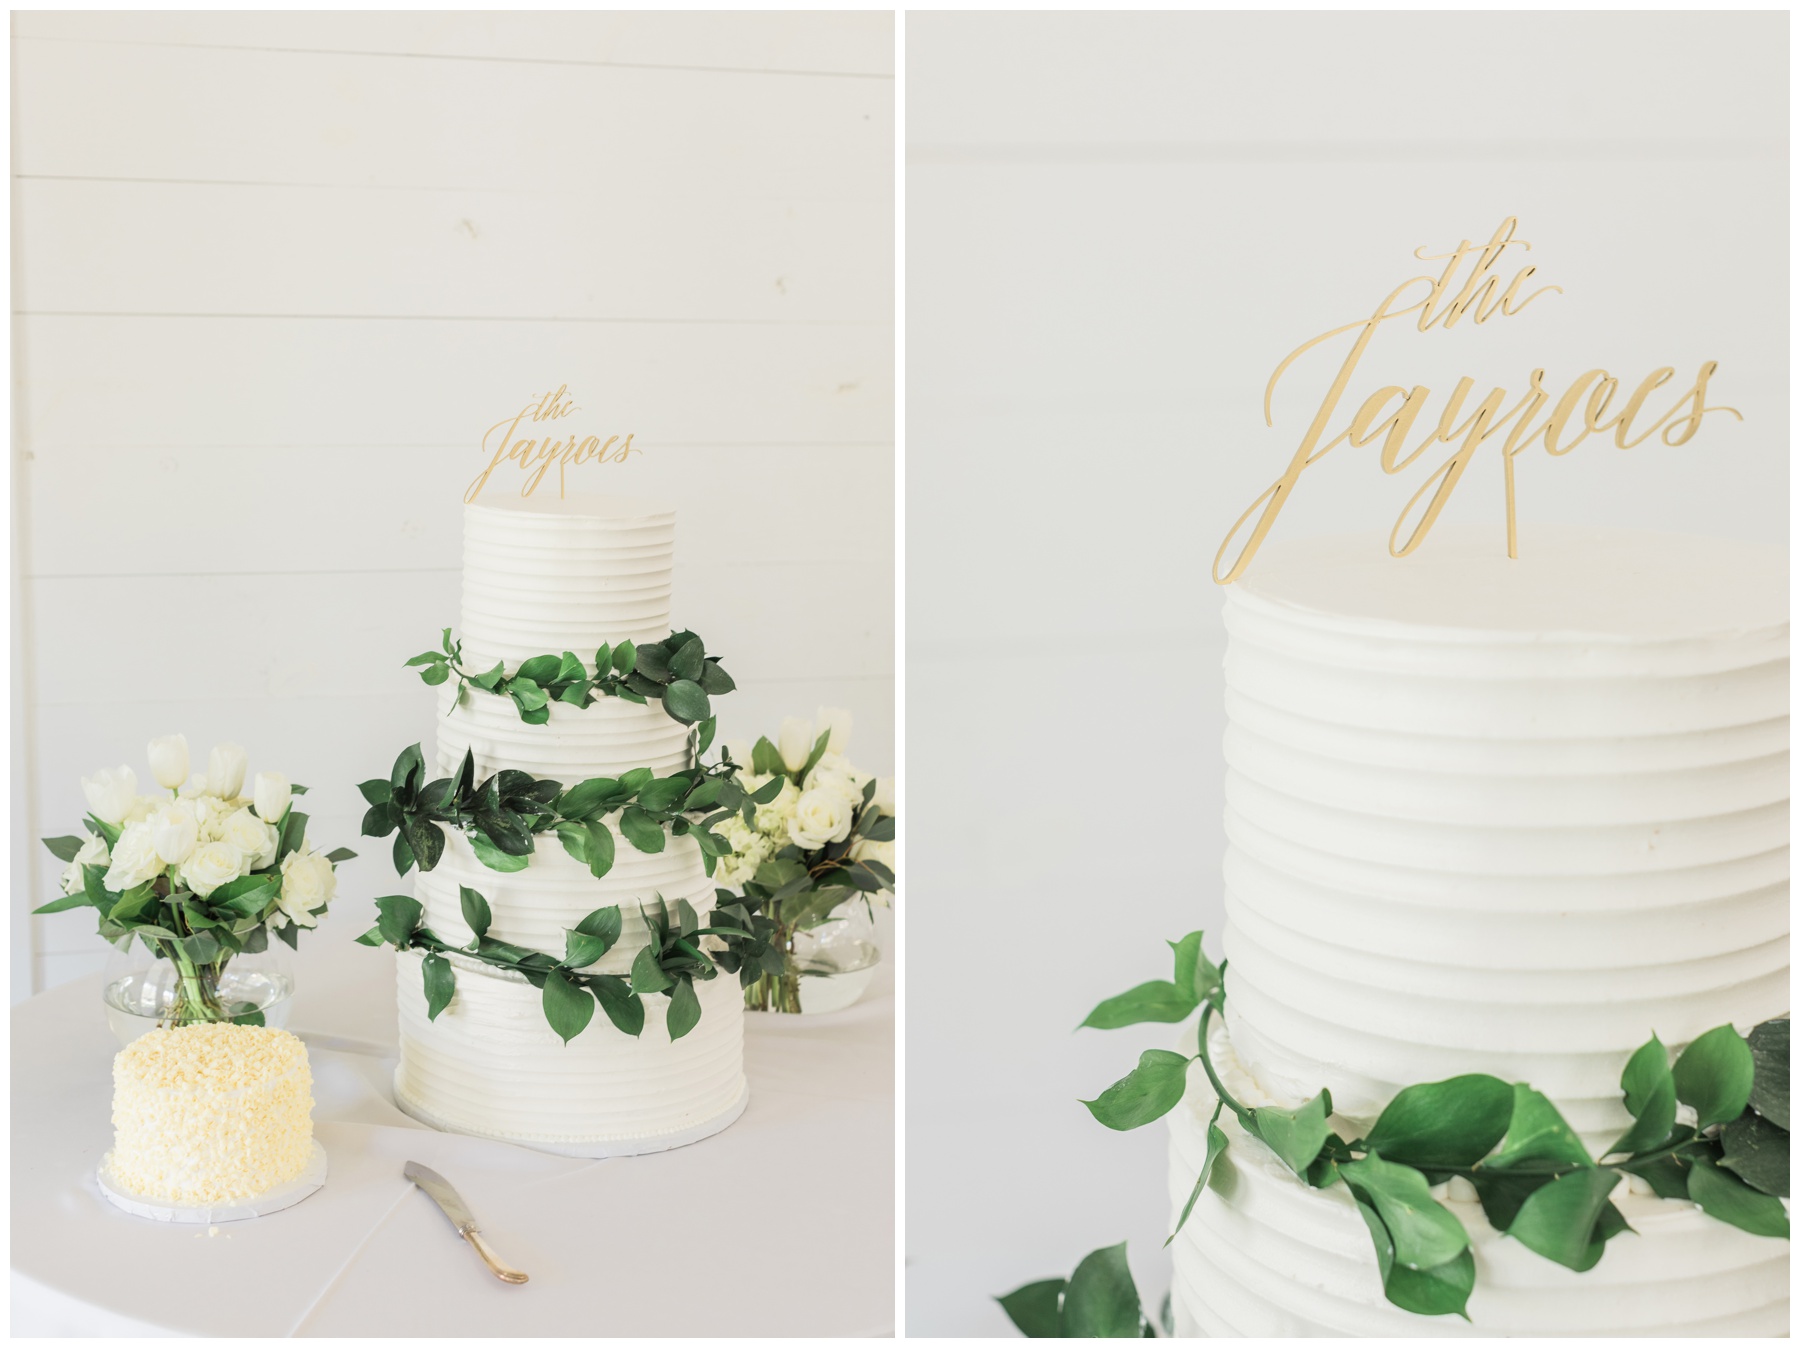 Wedding cake with white ribbed frosting, greenery, and a gold topper with the bride and groom's name